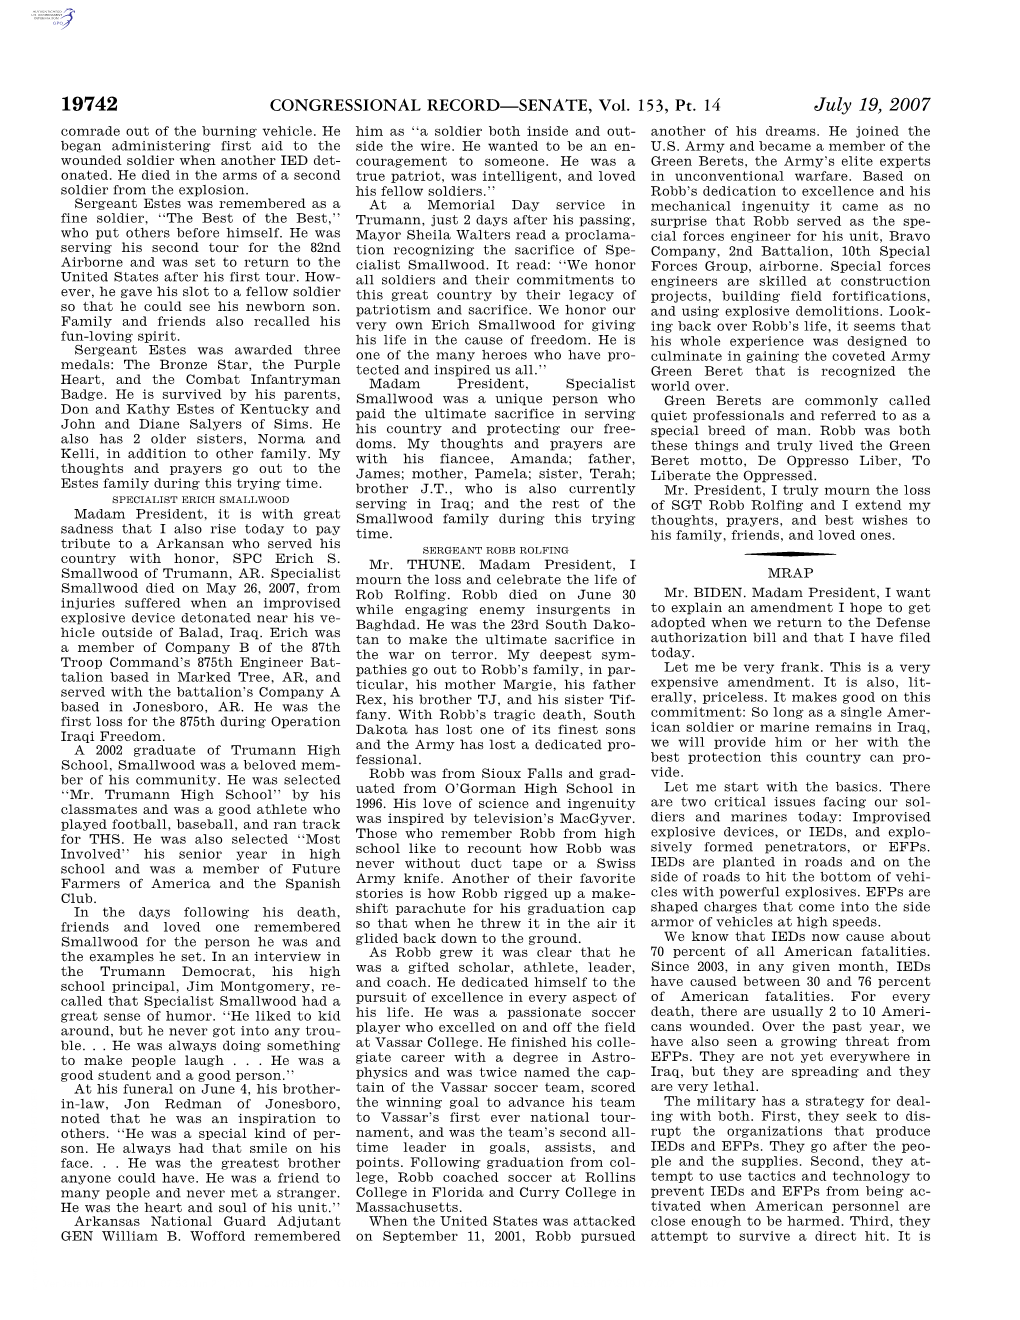 CONGRESSIONAL RECORD—SENATE, Vol. 153, Pt. 14 July 19, 2007 Comrade out of the Burning Vehicle